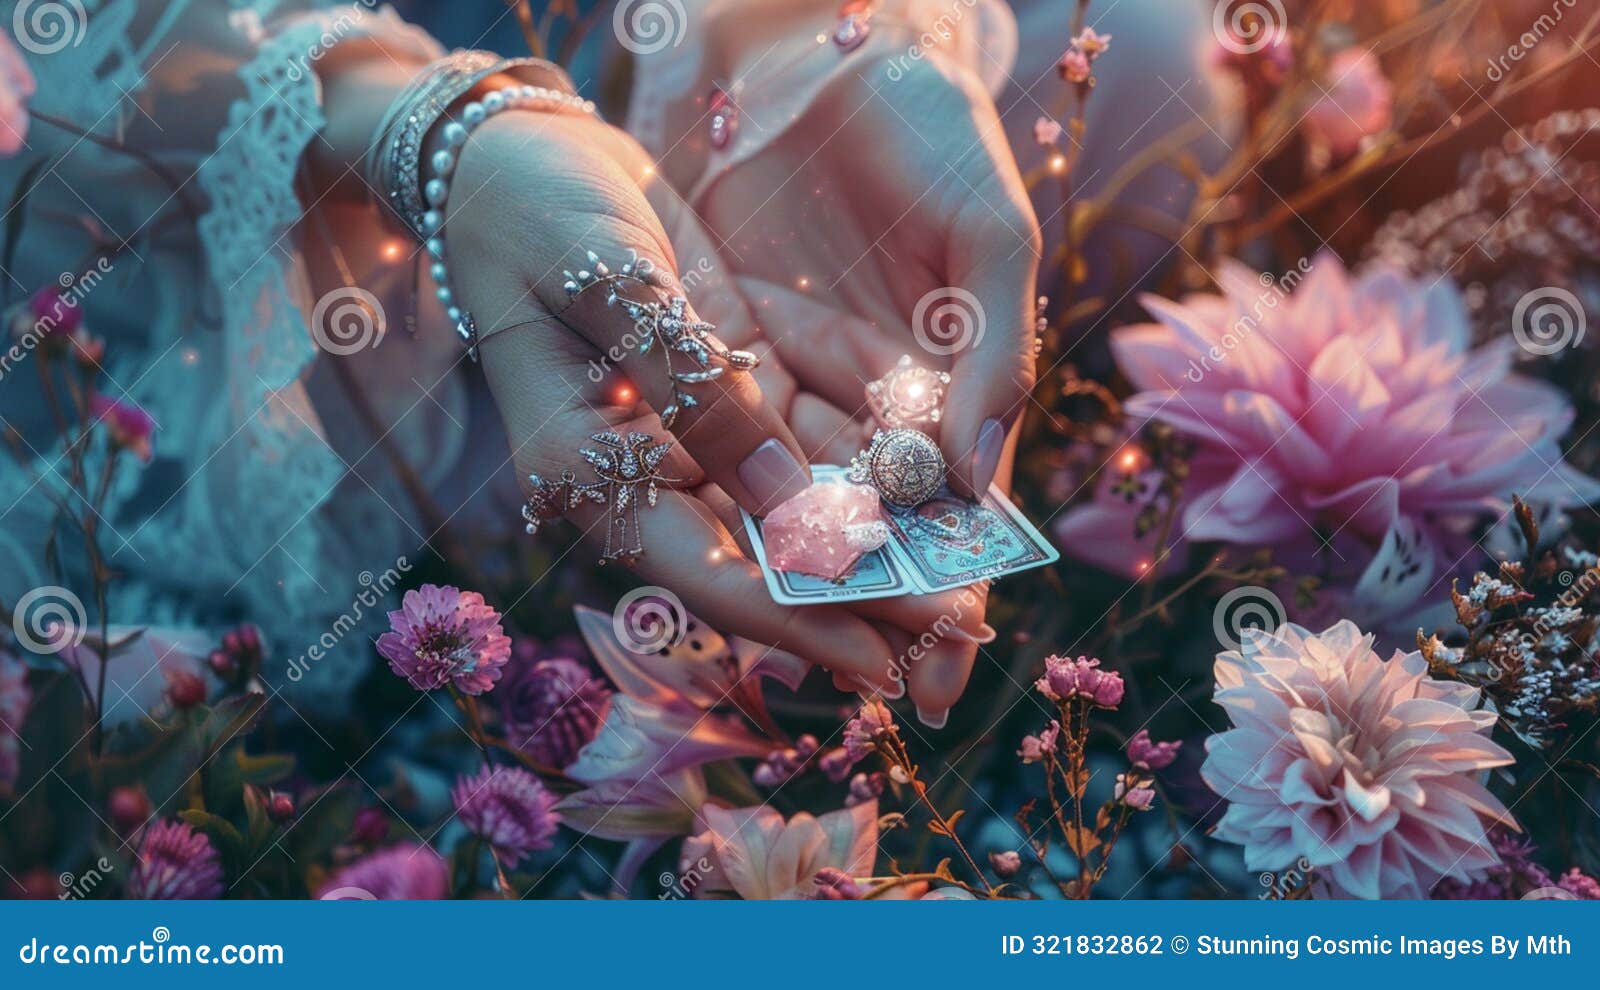 woman's hands in jewelry holding beautiful unique tarot deck cards surrounded by stunning crystals gems & gorgeous colorful flower